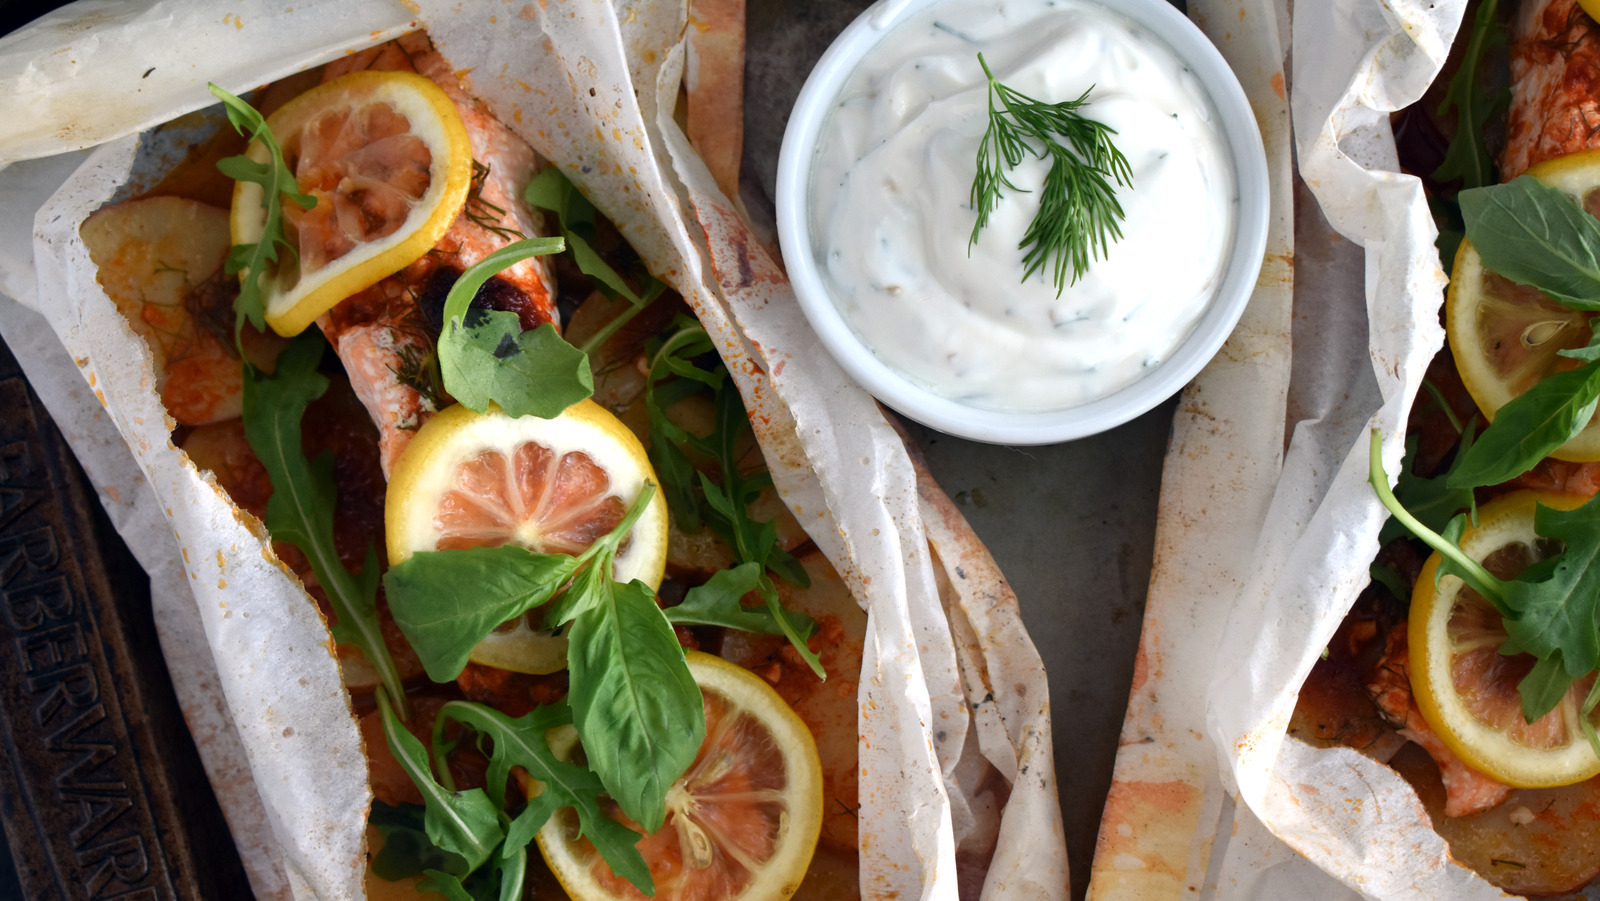 Gallery: How to Cook En Papillote